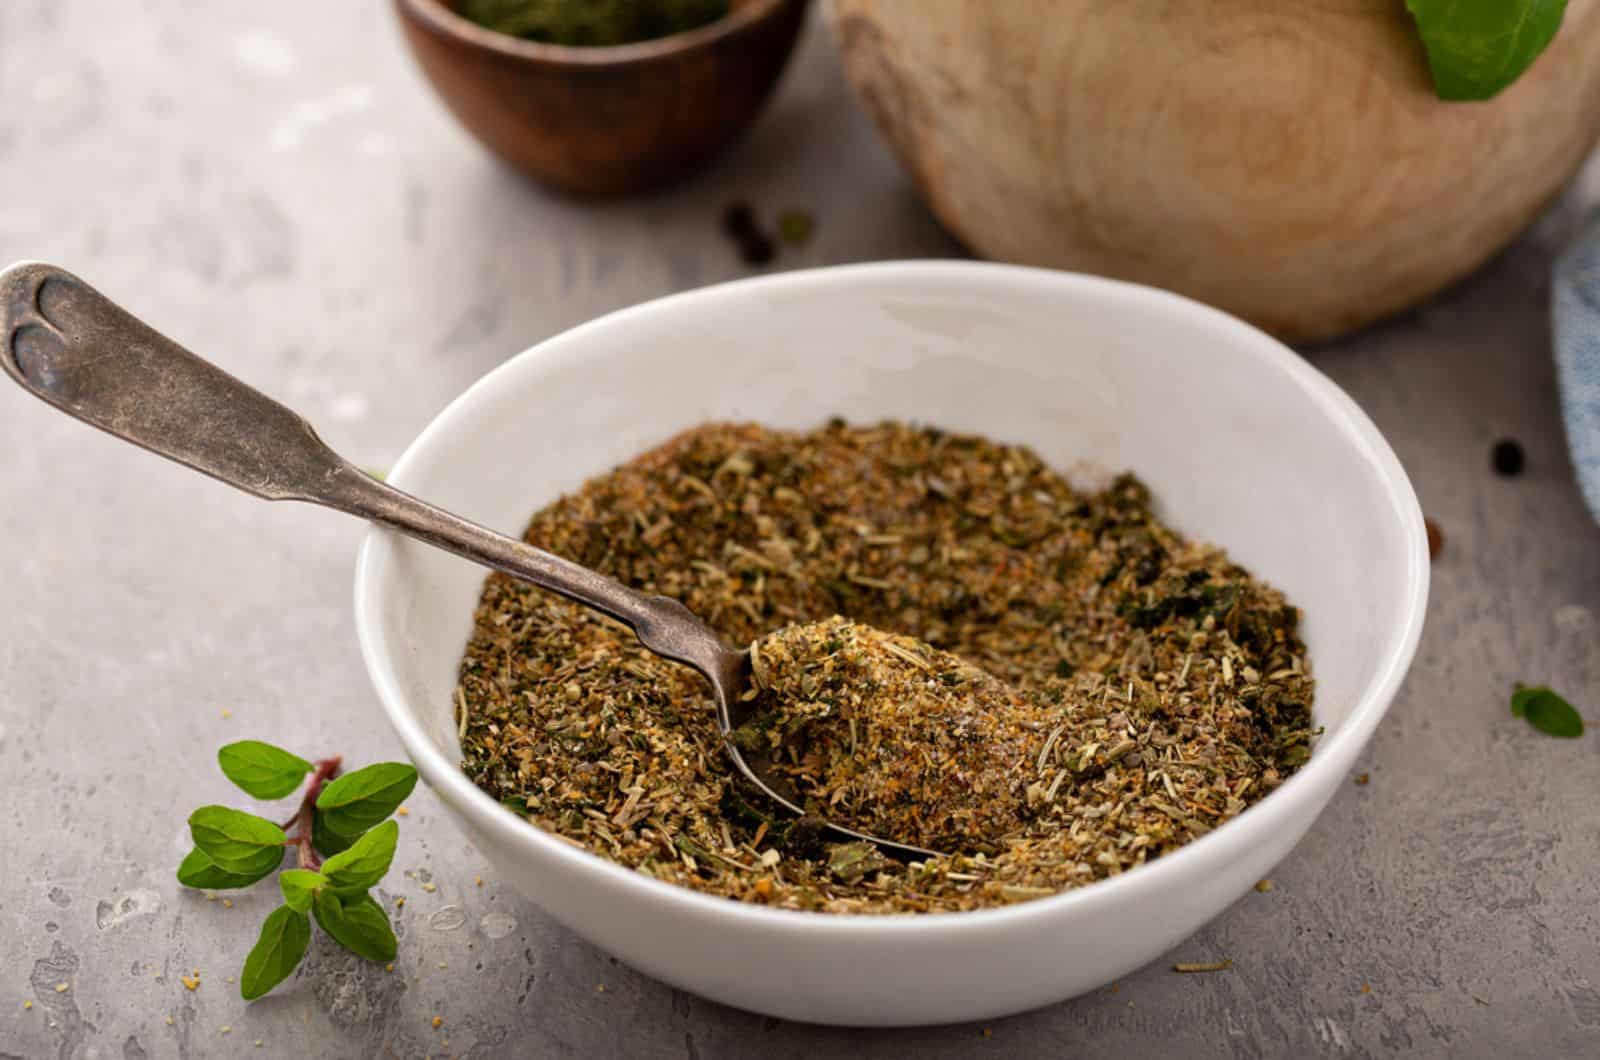 Homemade greek seasoning mix of dried herbs and spices